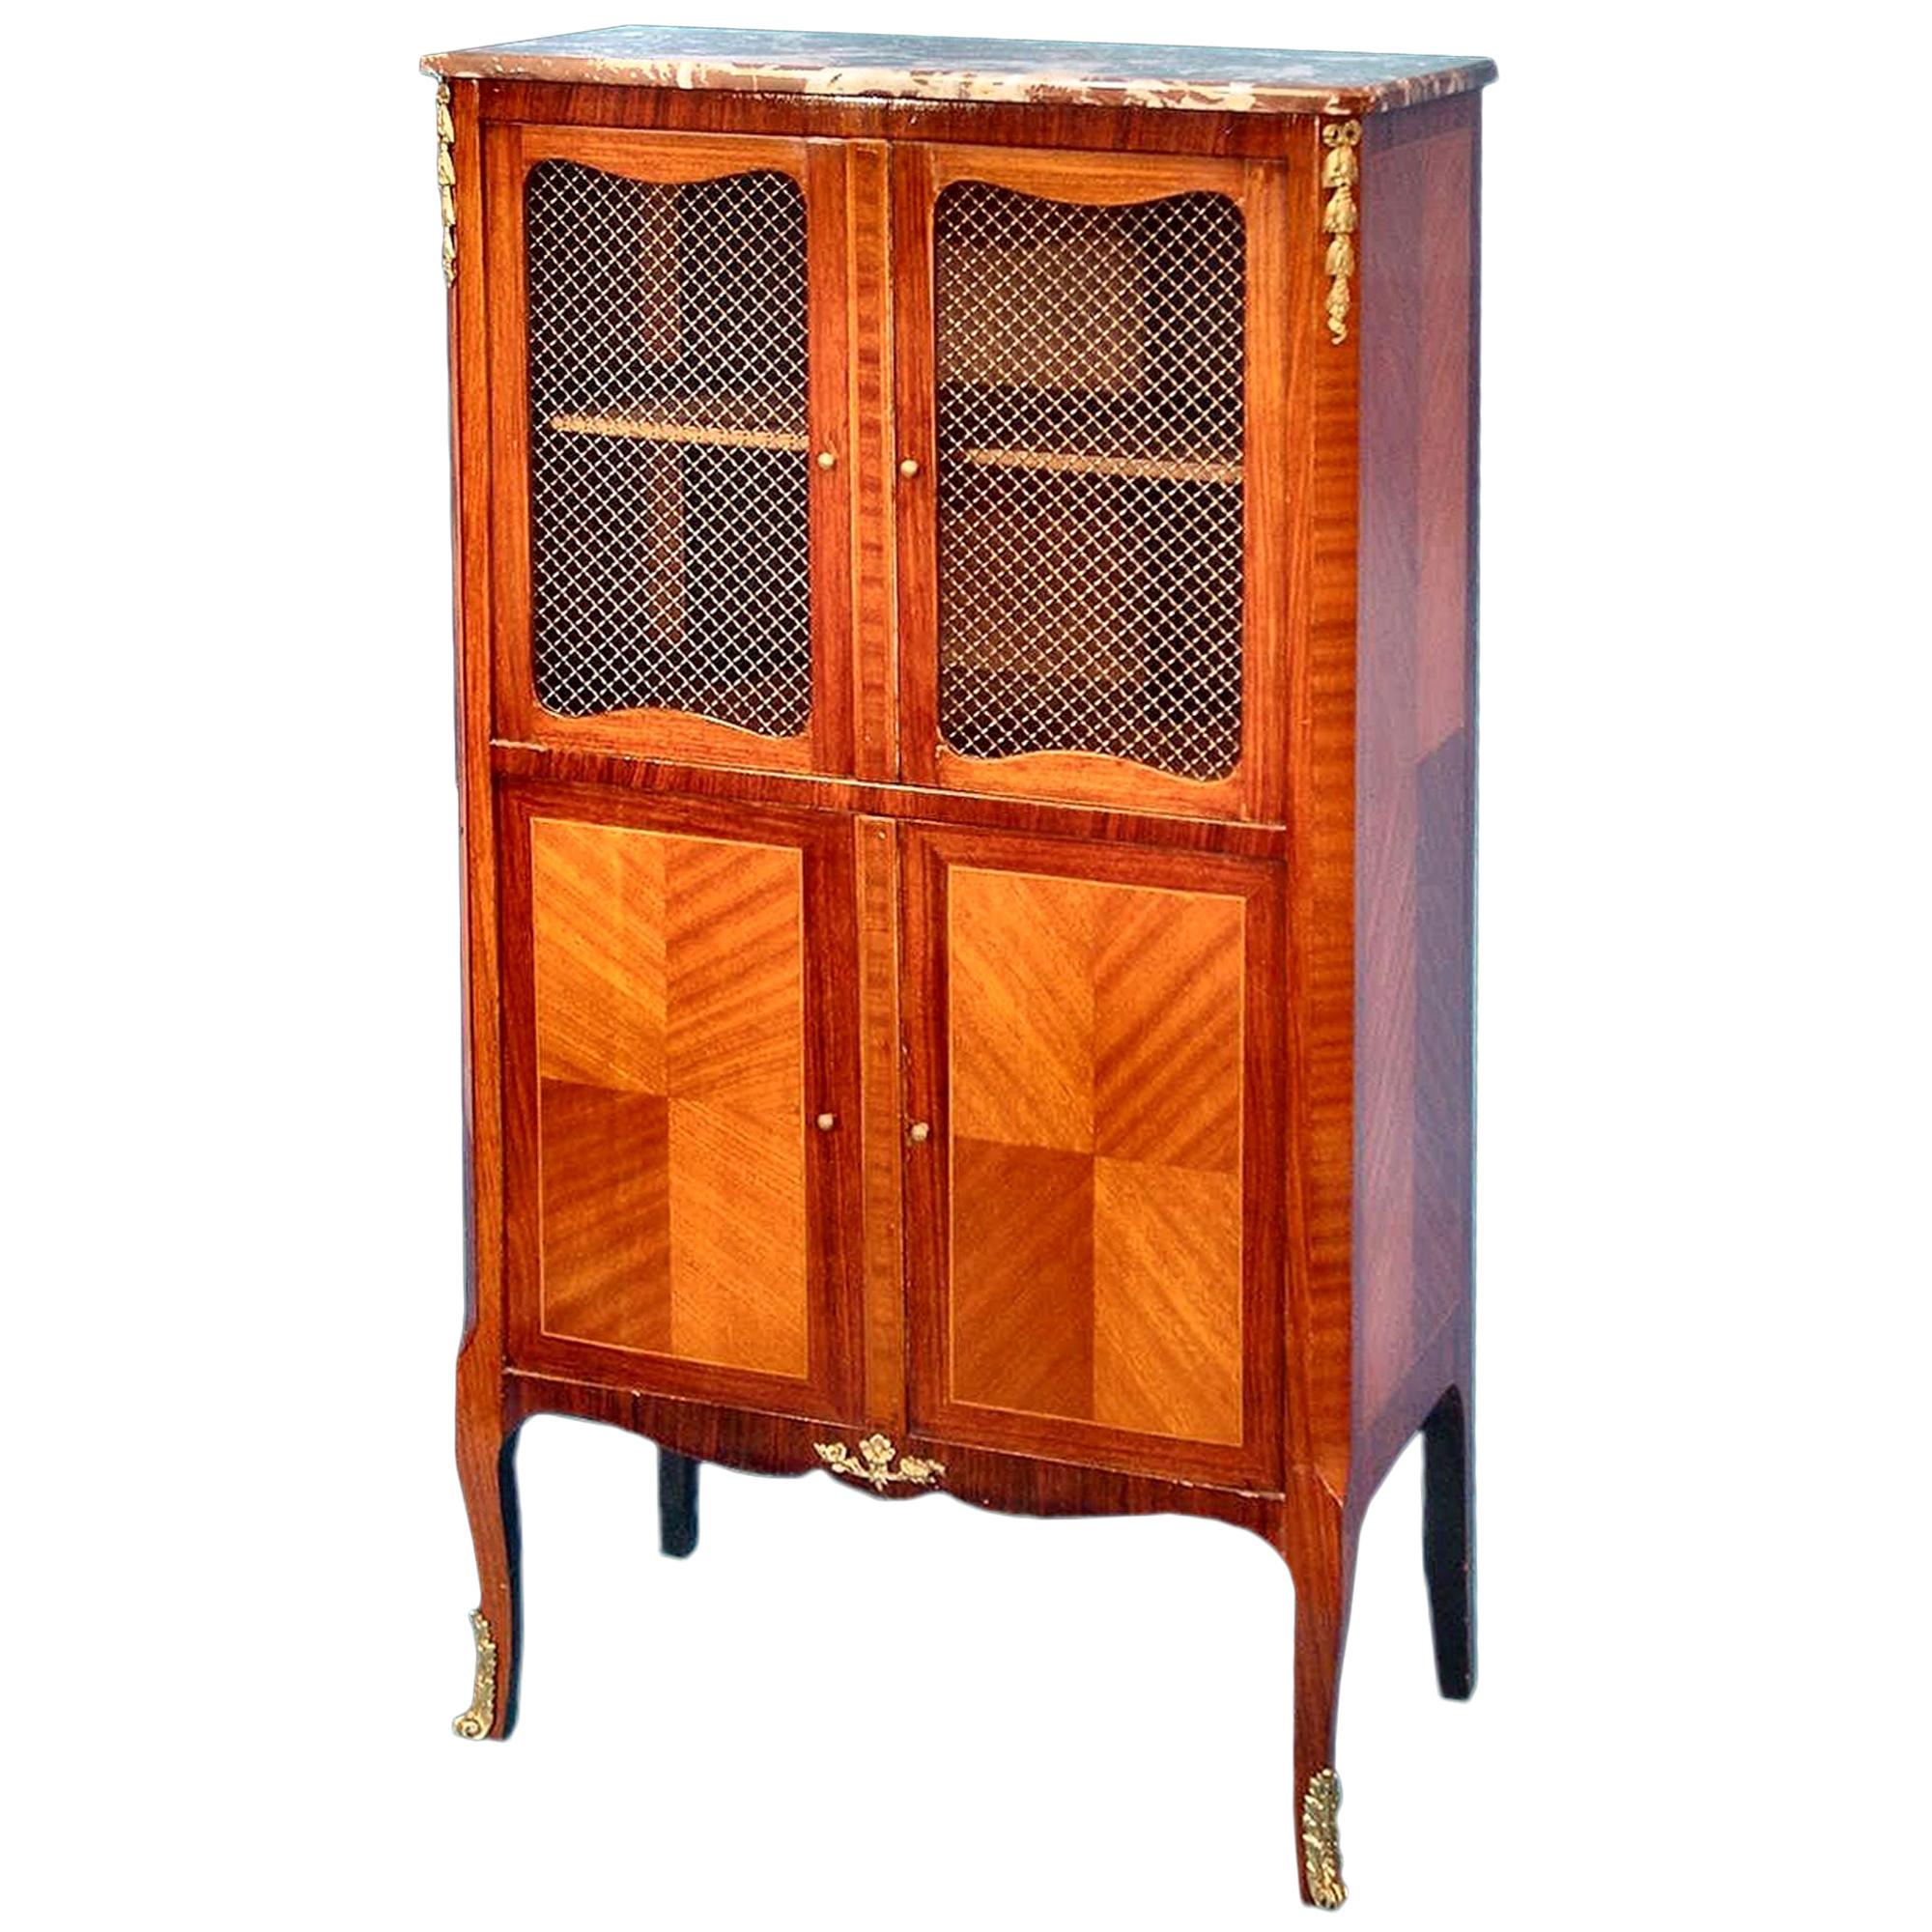 French 19th Century Transitional Four-Door Cabinet or Vitrine with a Marble Top